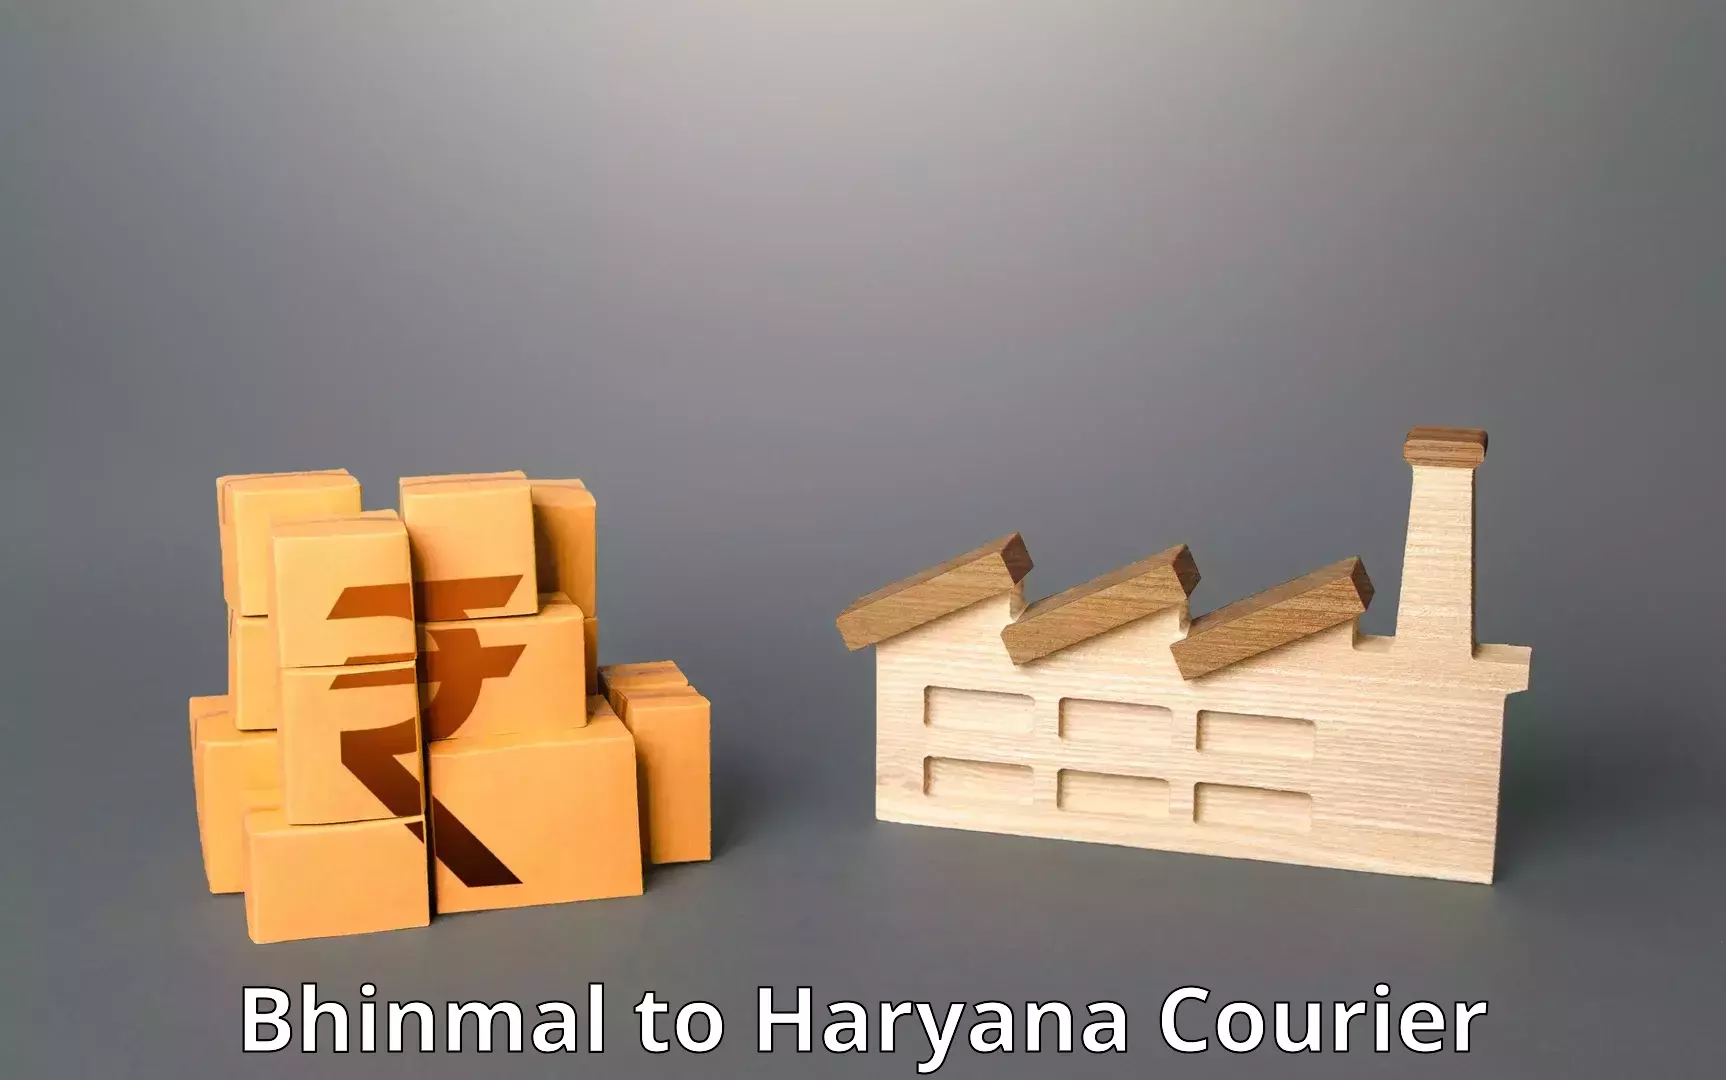 24/7 courier service Bhinmal to Haryana